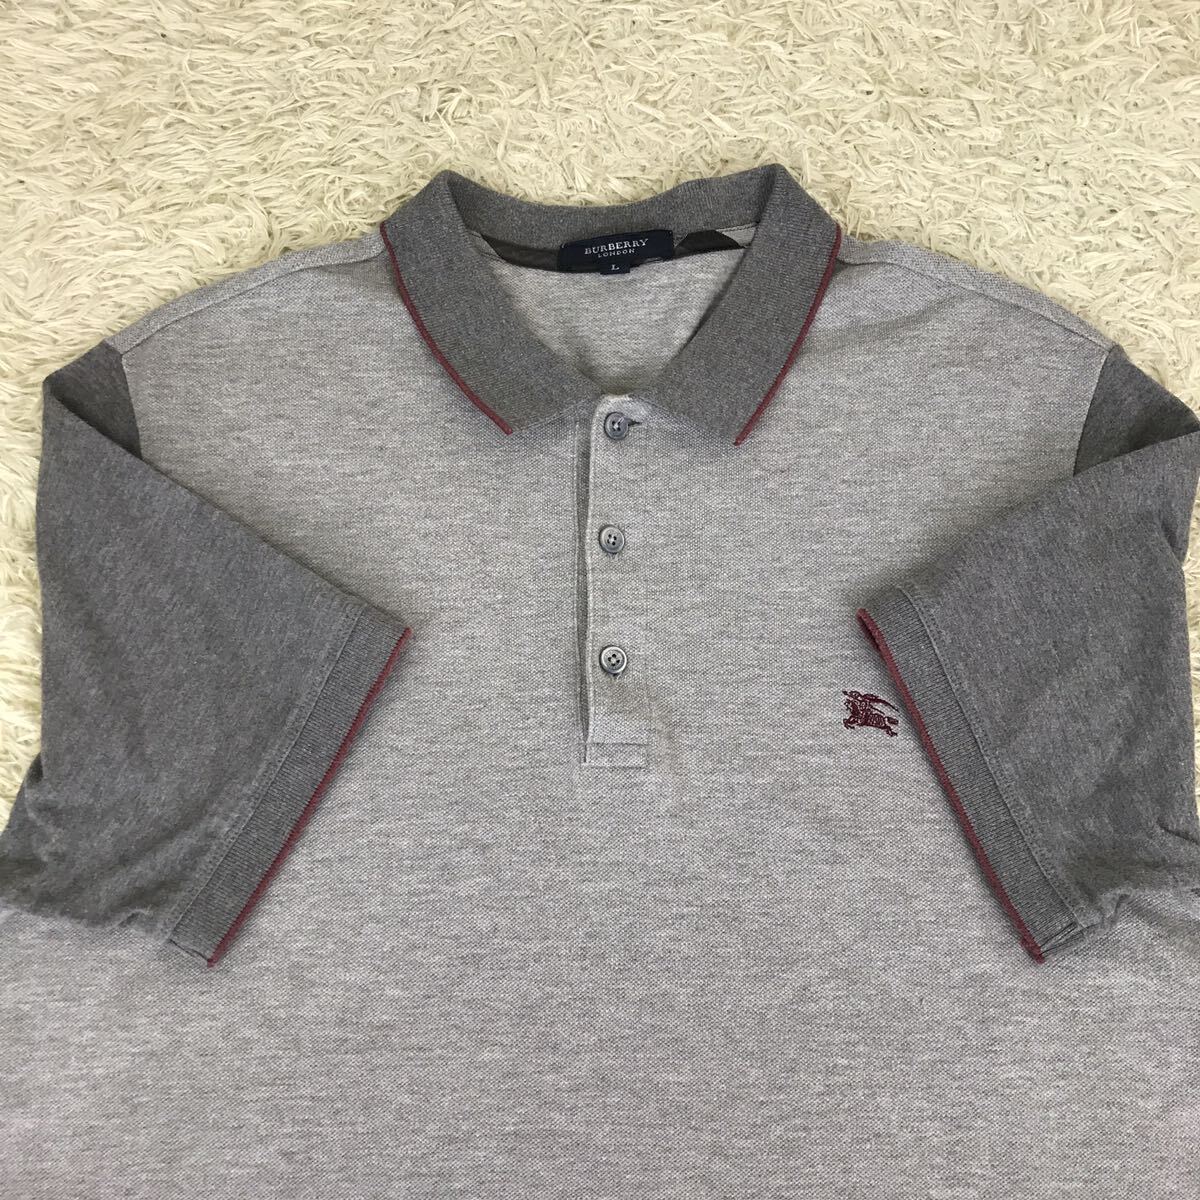  Burberry London polo-shirt with short sleeves tops hose Logo embroidery gray bai color made in Japan men's size L grey BURBERRYLONDON